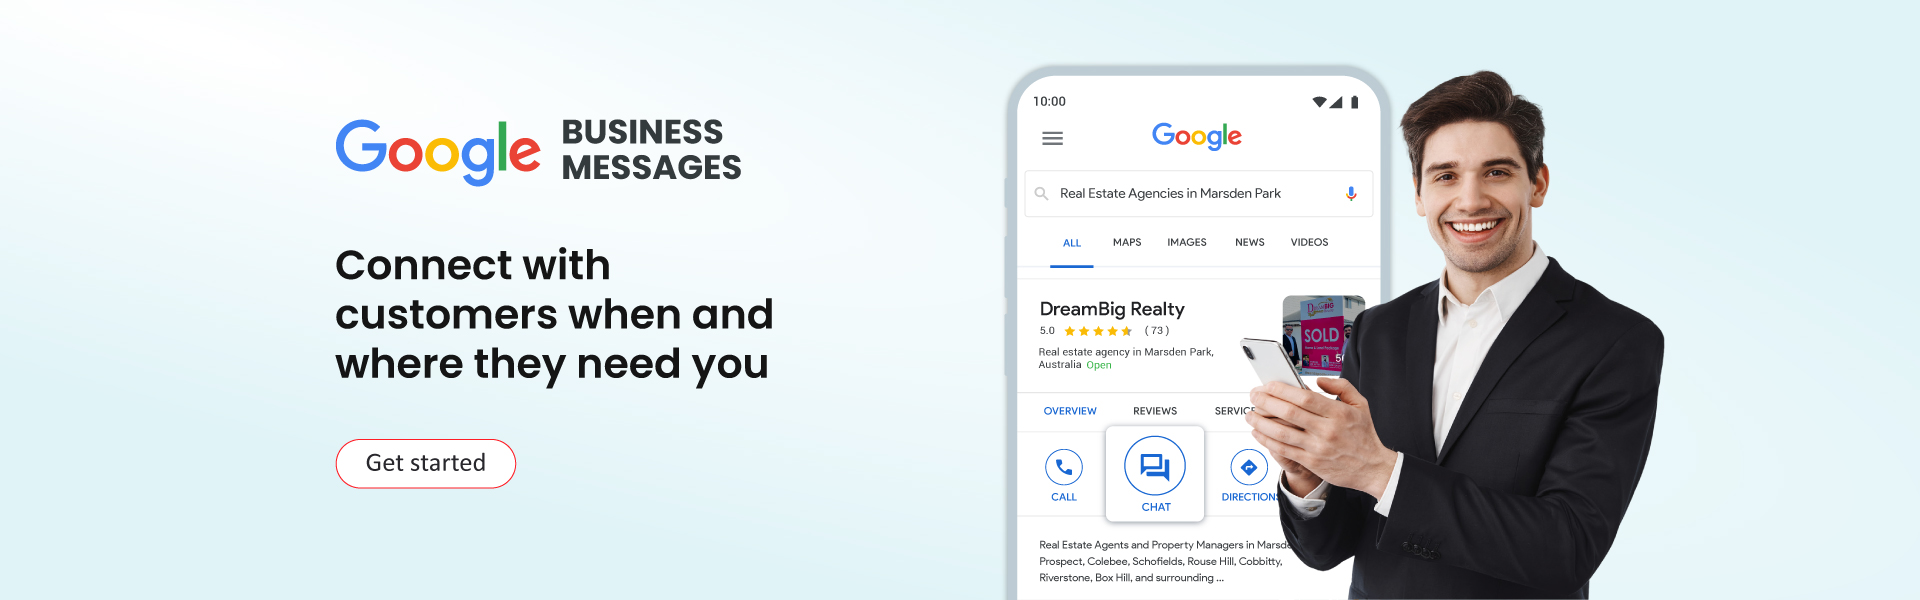 Google Business Messages with Realbot